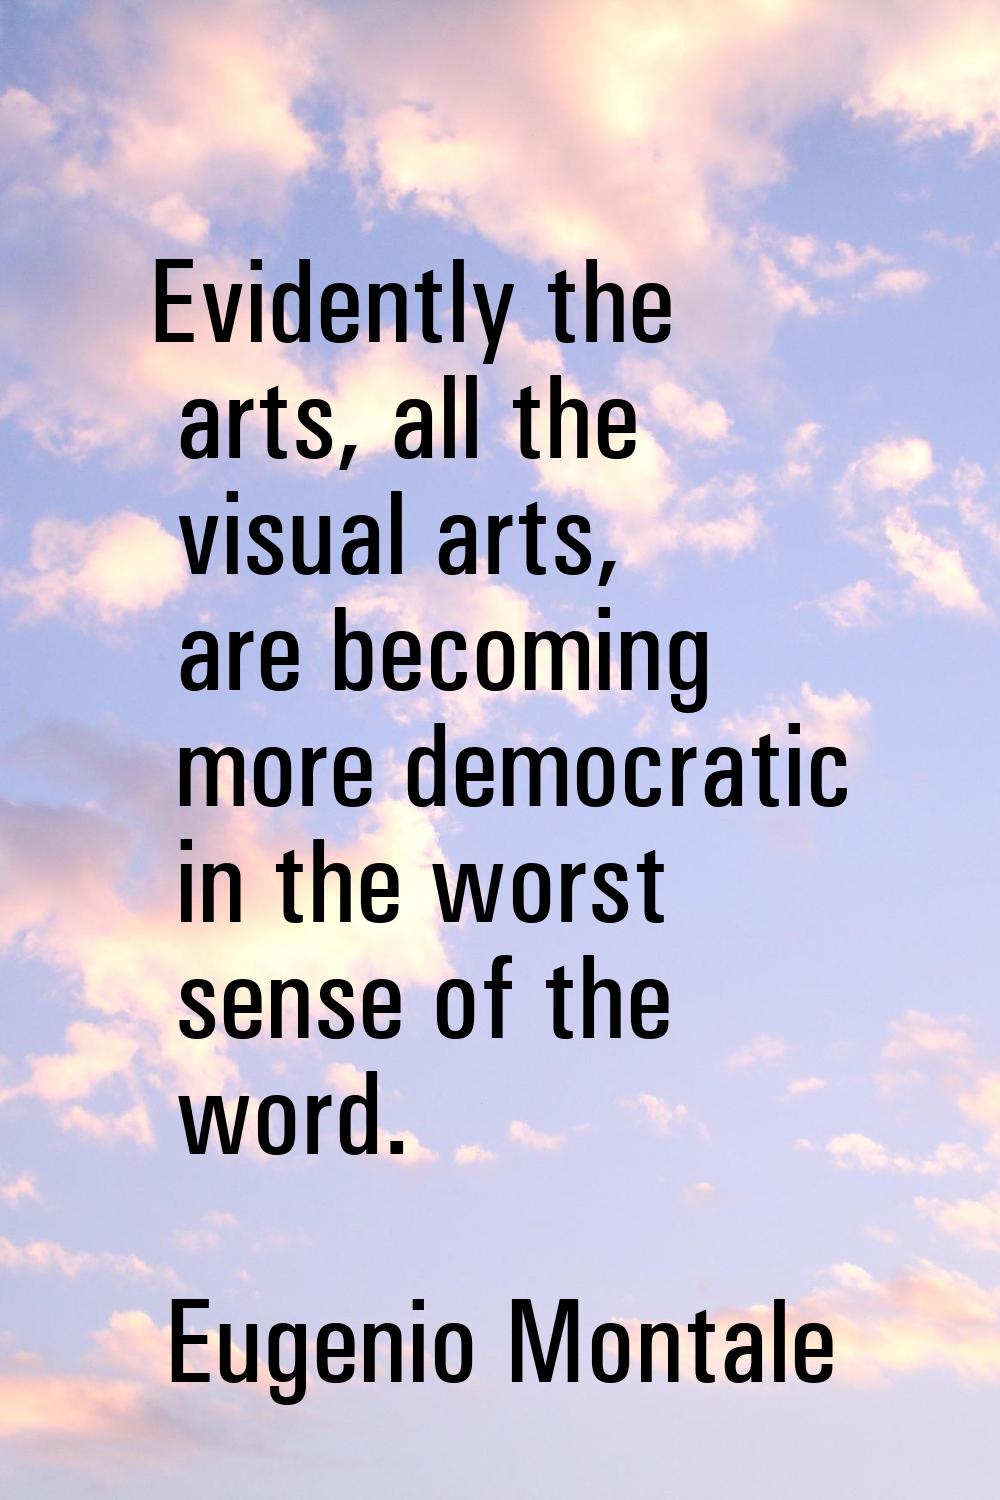 Evidently the arts, all the visual arts, are becoming more democratic in the worst sense of the wor